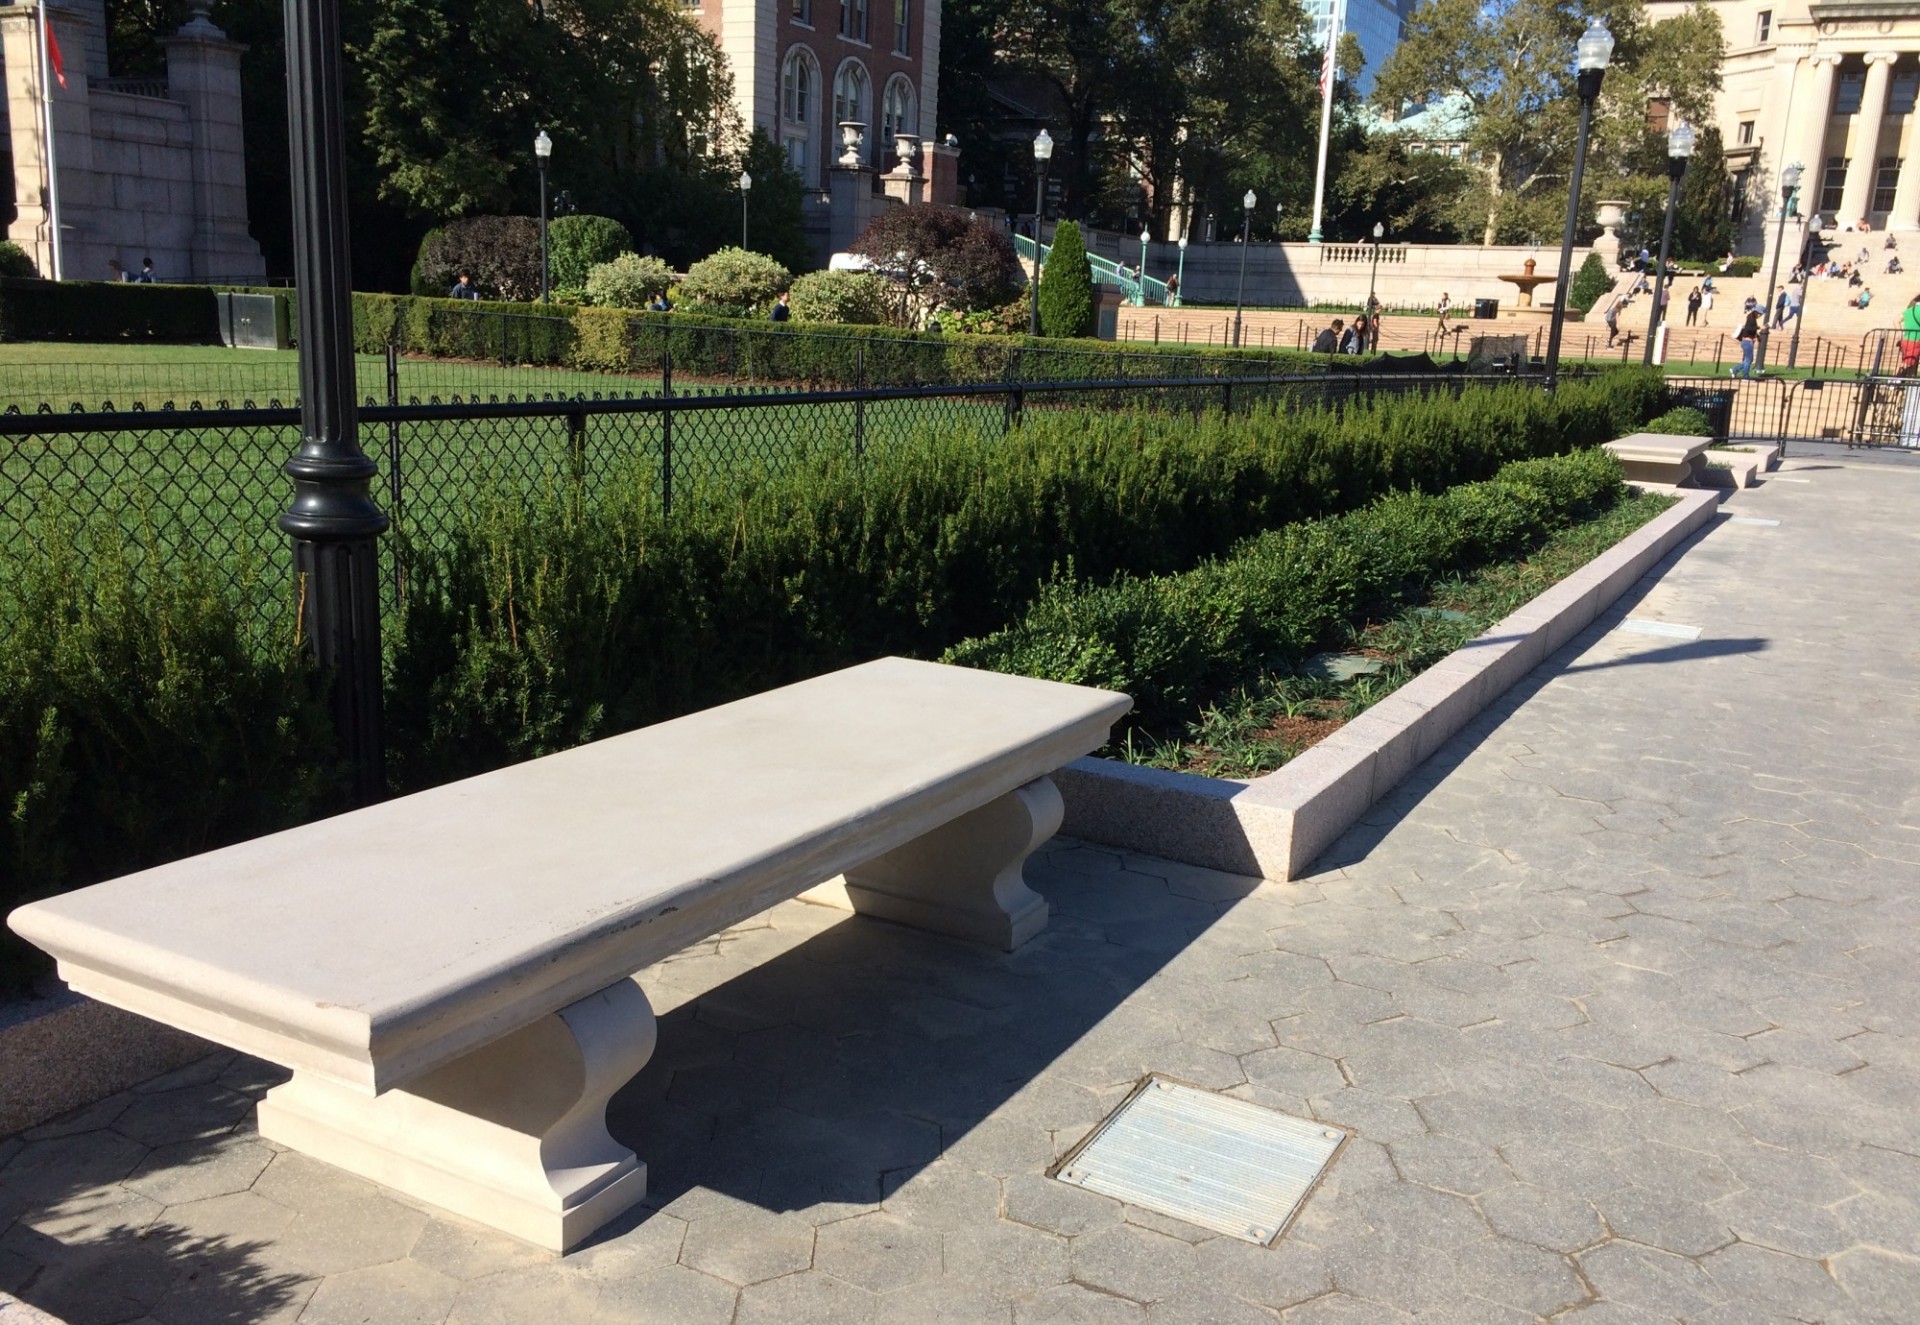 One of eight new benches installed along the perimeter of Butler Lawn (Photograph from October 3, 2017)